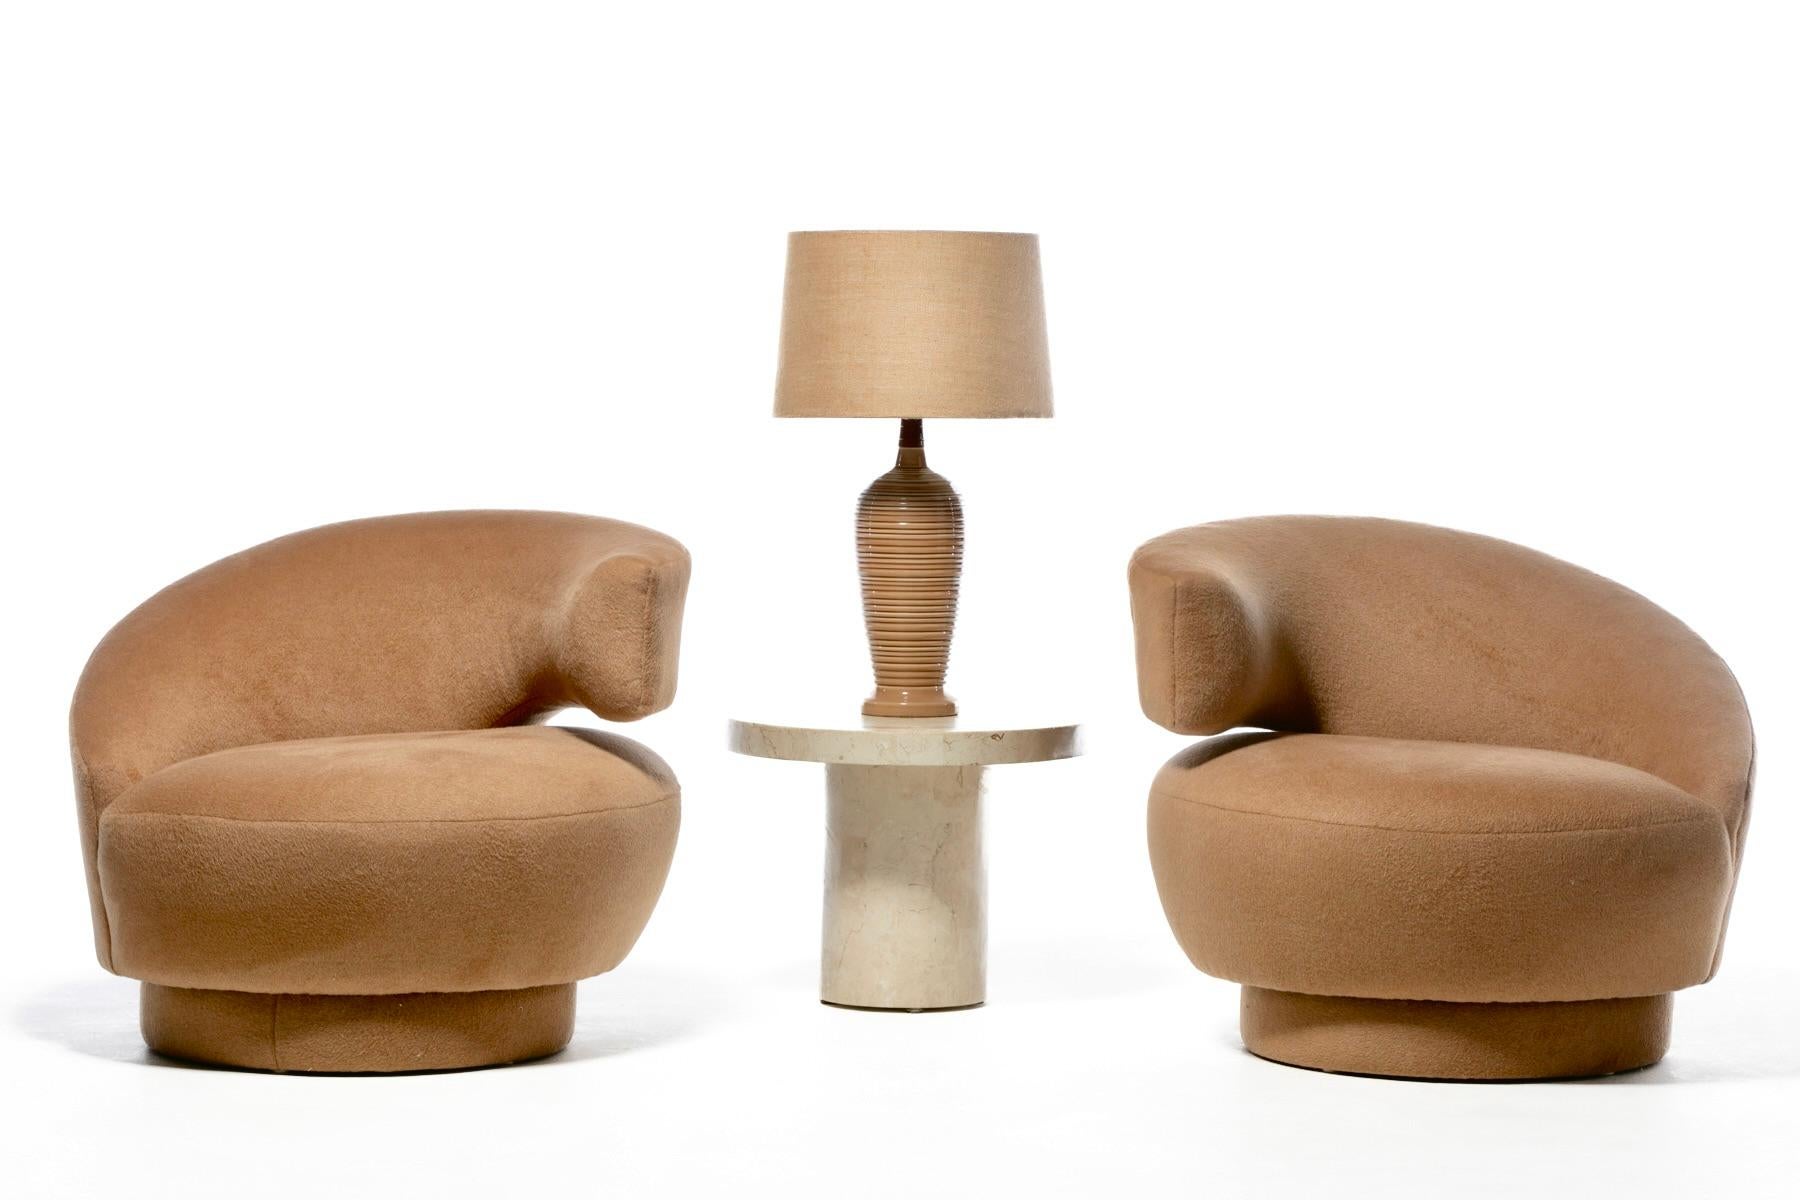 Vladimir Kagan Caterpillar Chairs Newly Upholstered in Camel Color Mohair In Good Condition For Sale In Saint Louis, MO